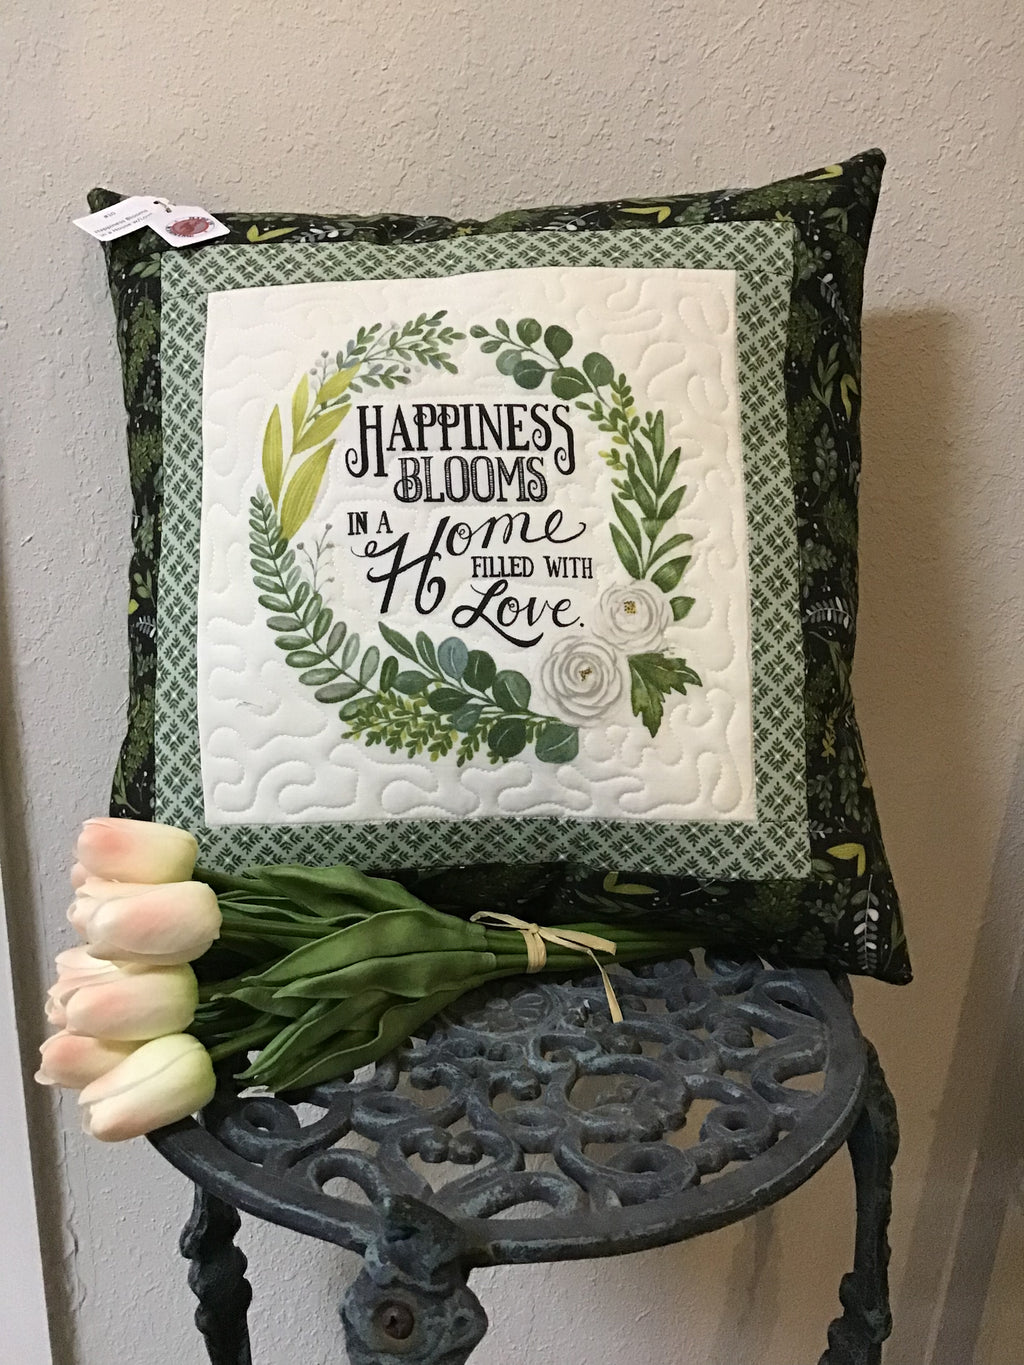 CHRIS' CREATIONS #10 Happiness Blooms in a Home w/Love Pillow